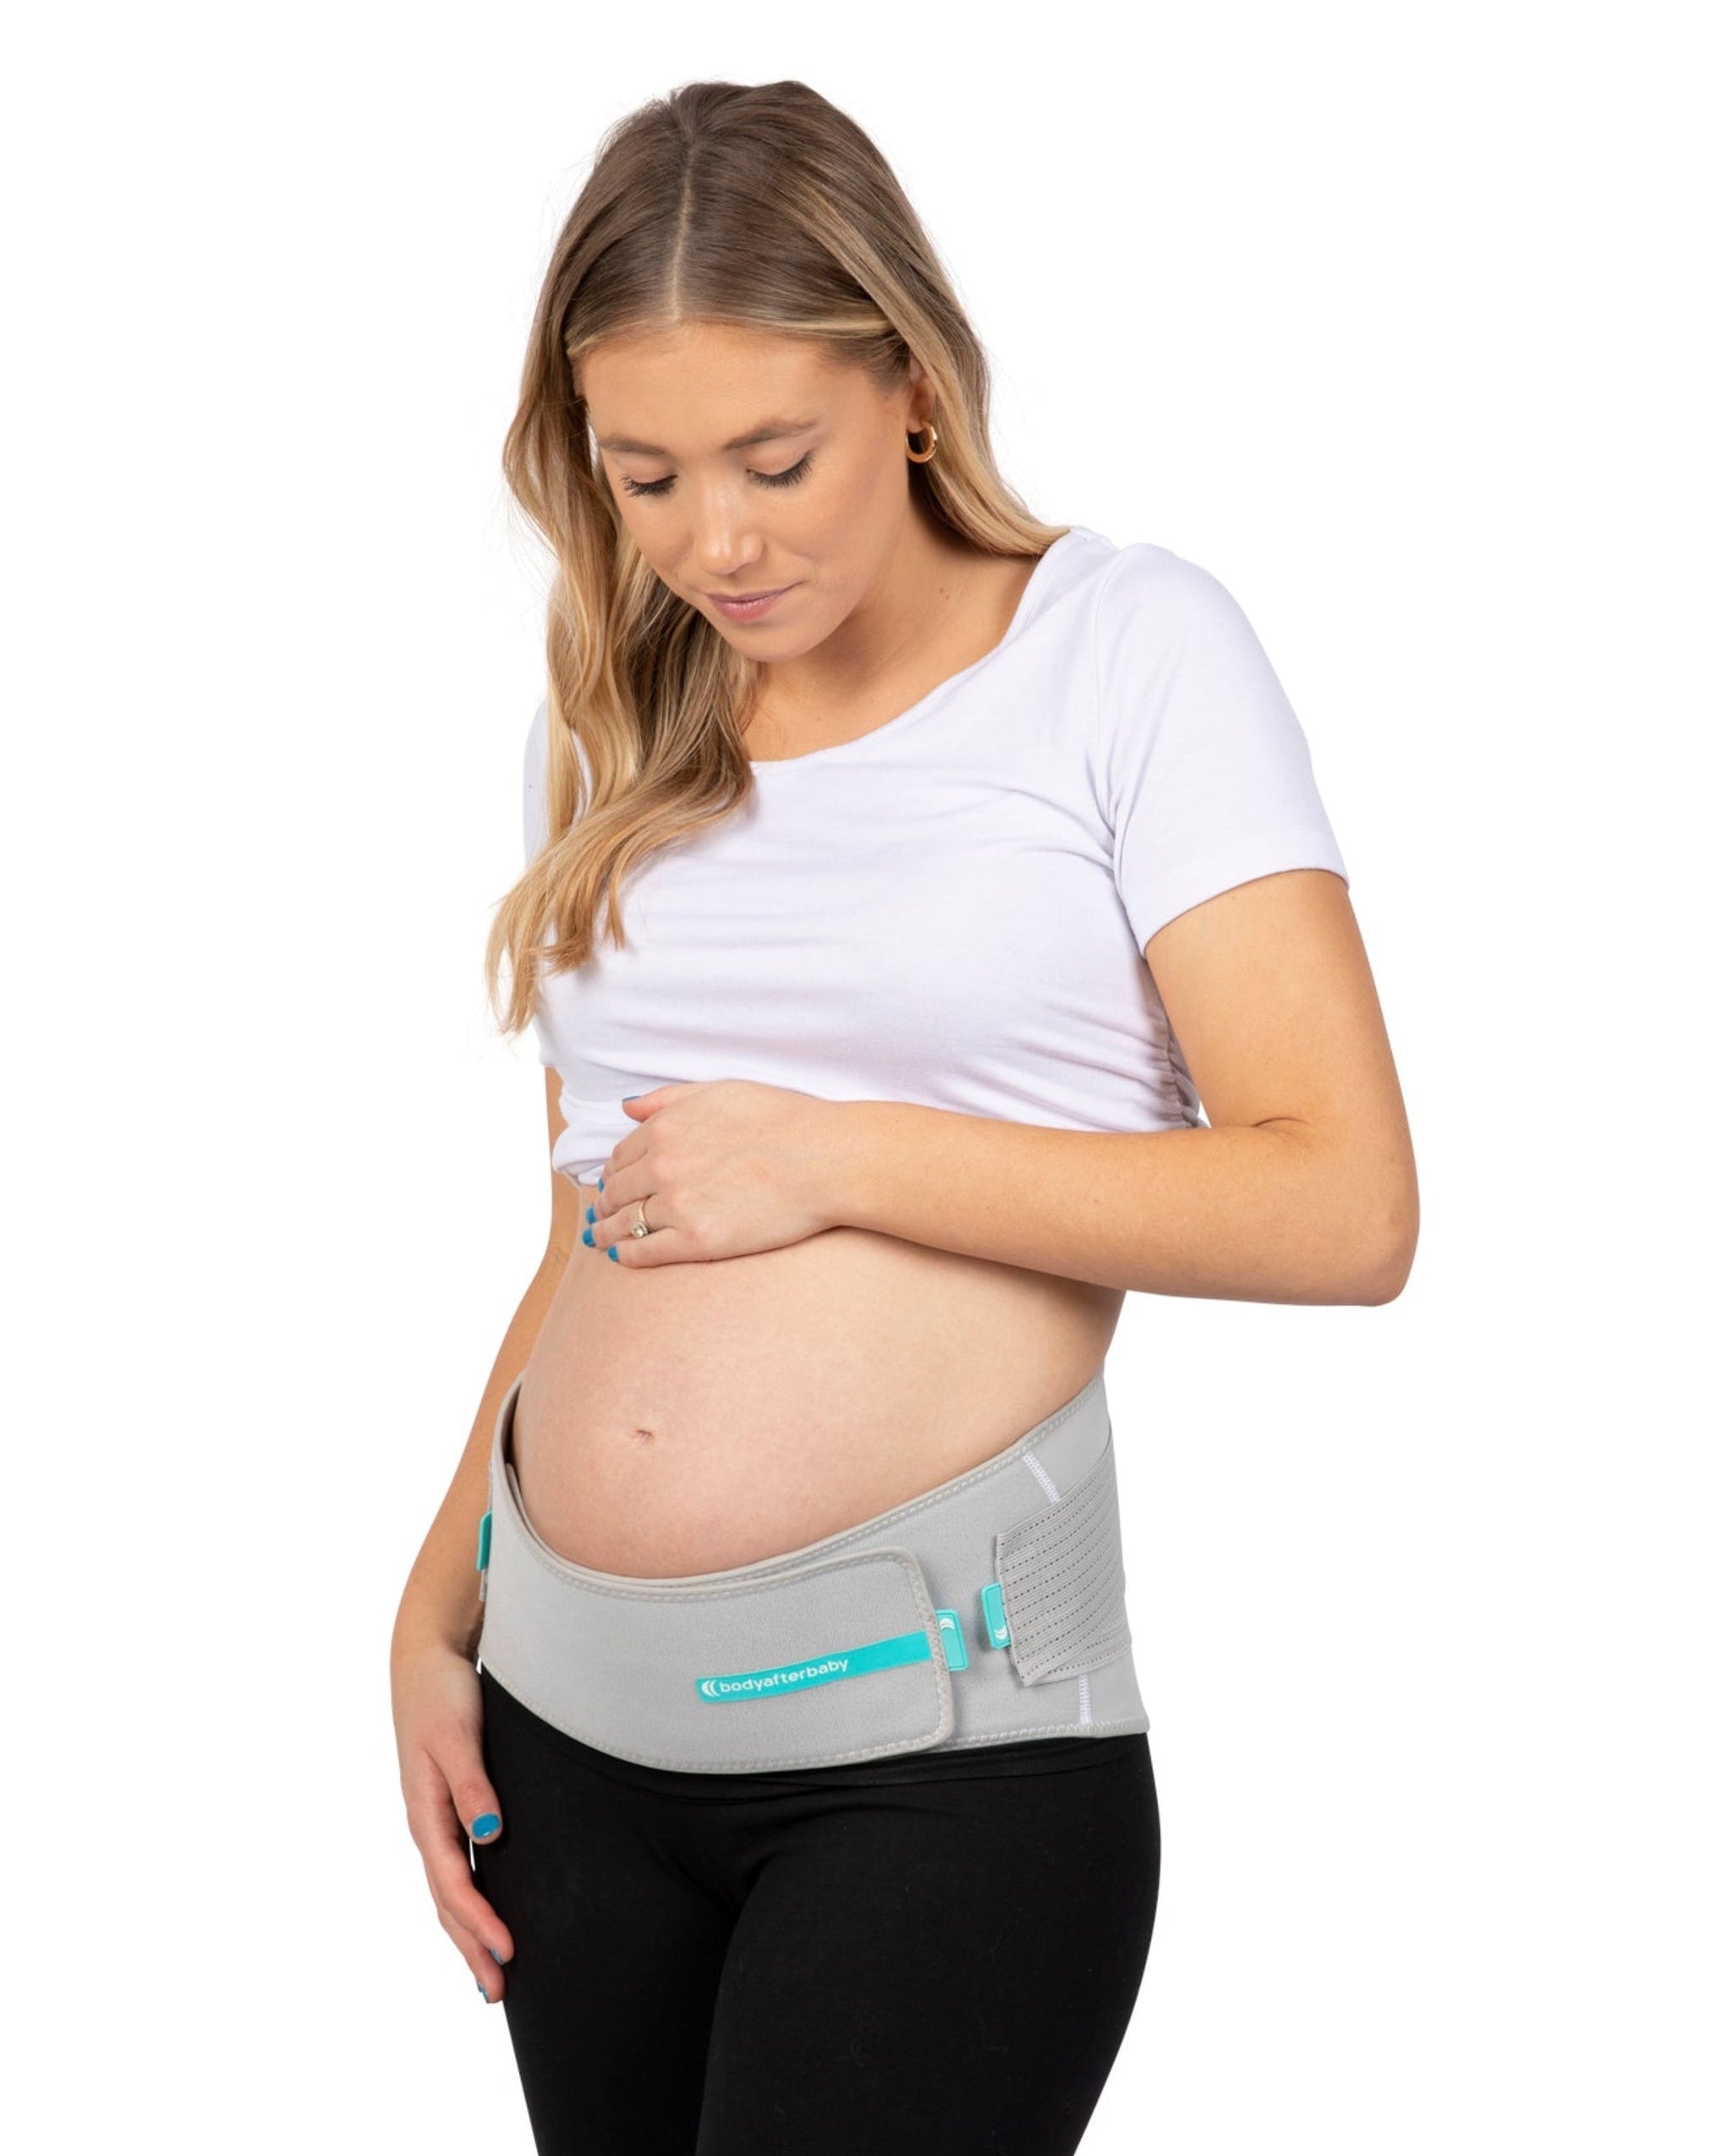 THE NINER BY BODY AFTER BABY : THE ULTIMATE PREGNANCY SUPPORT – Body After  Baby